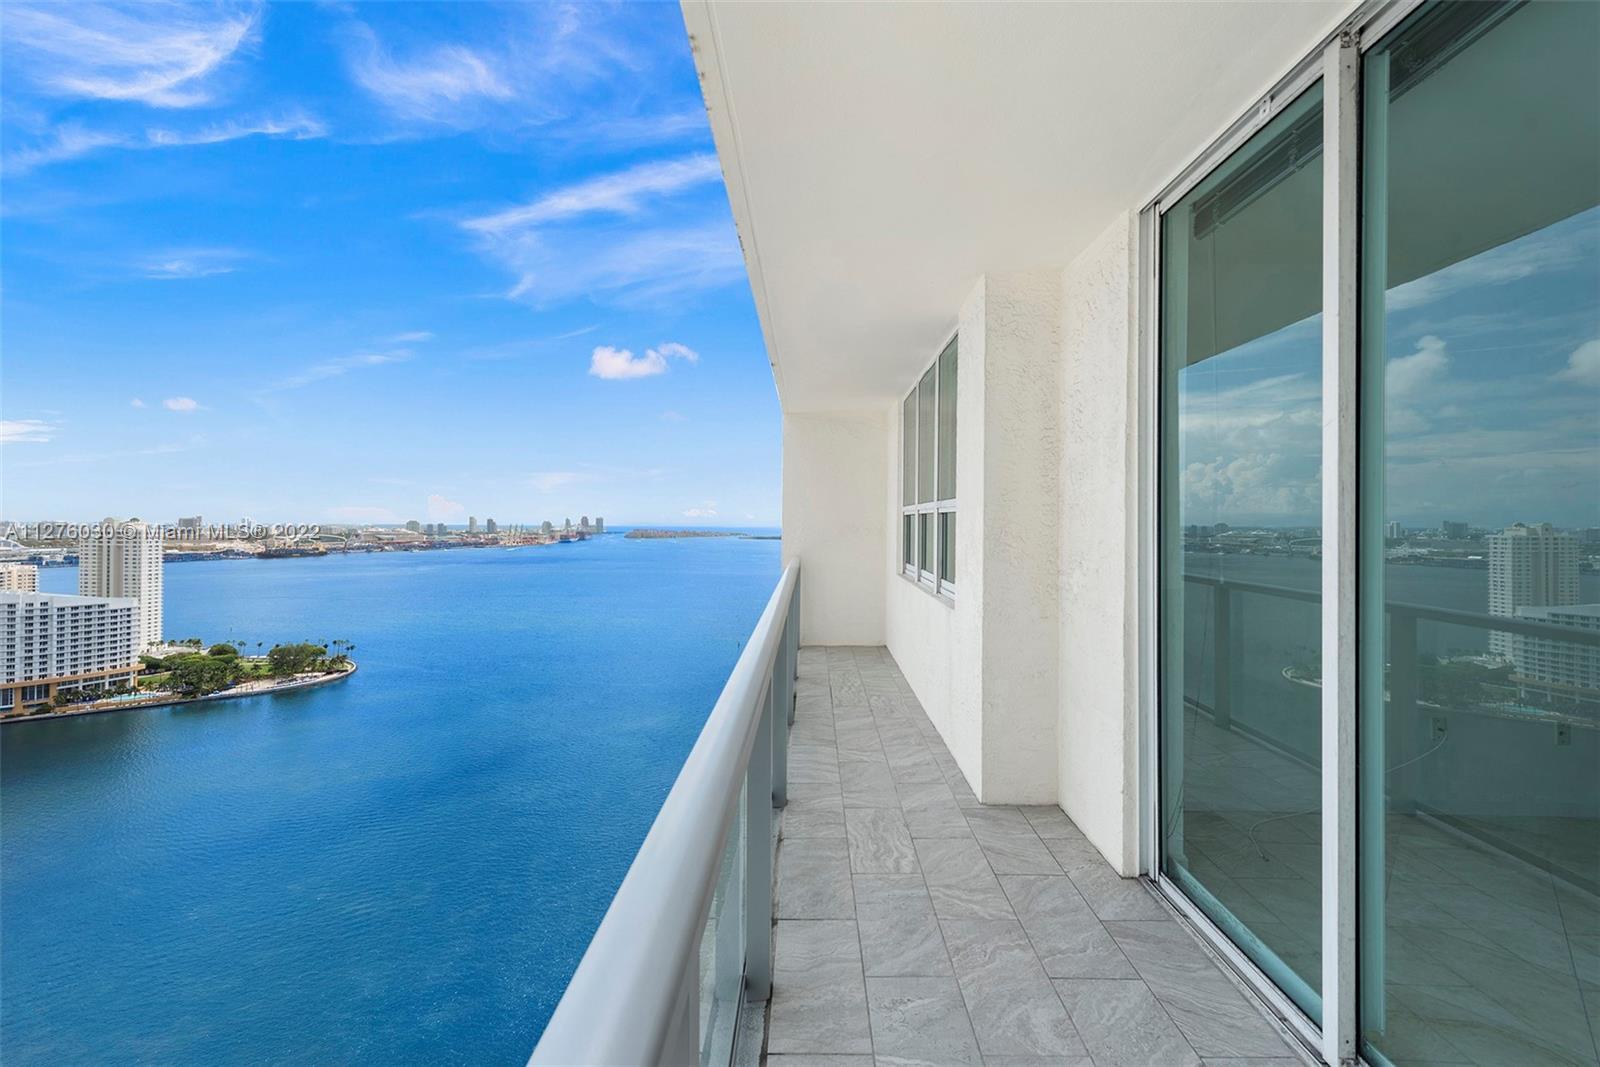 Absolutely Breathtaking Unobstructed Waterfront Views from the Penthouse level. This 3 bedroom 2 bat